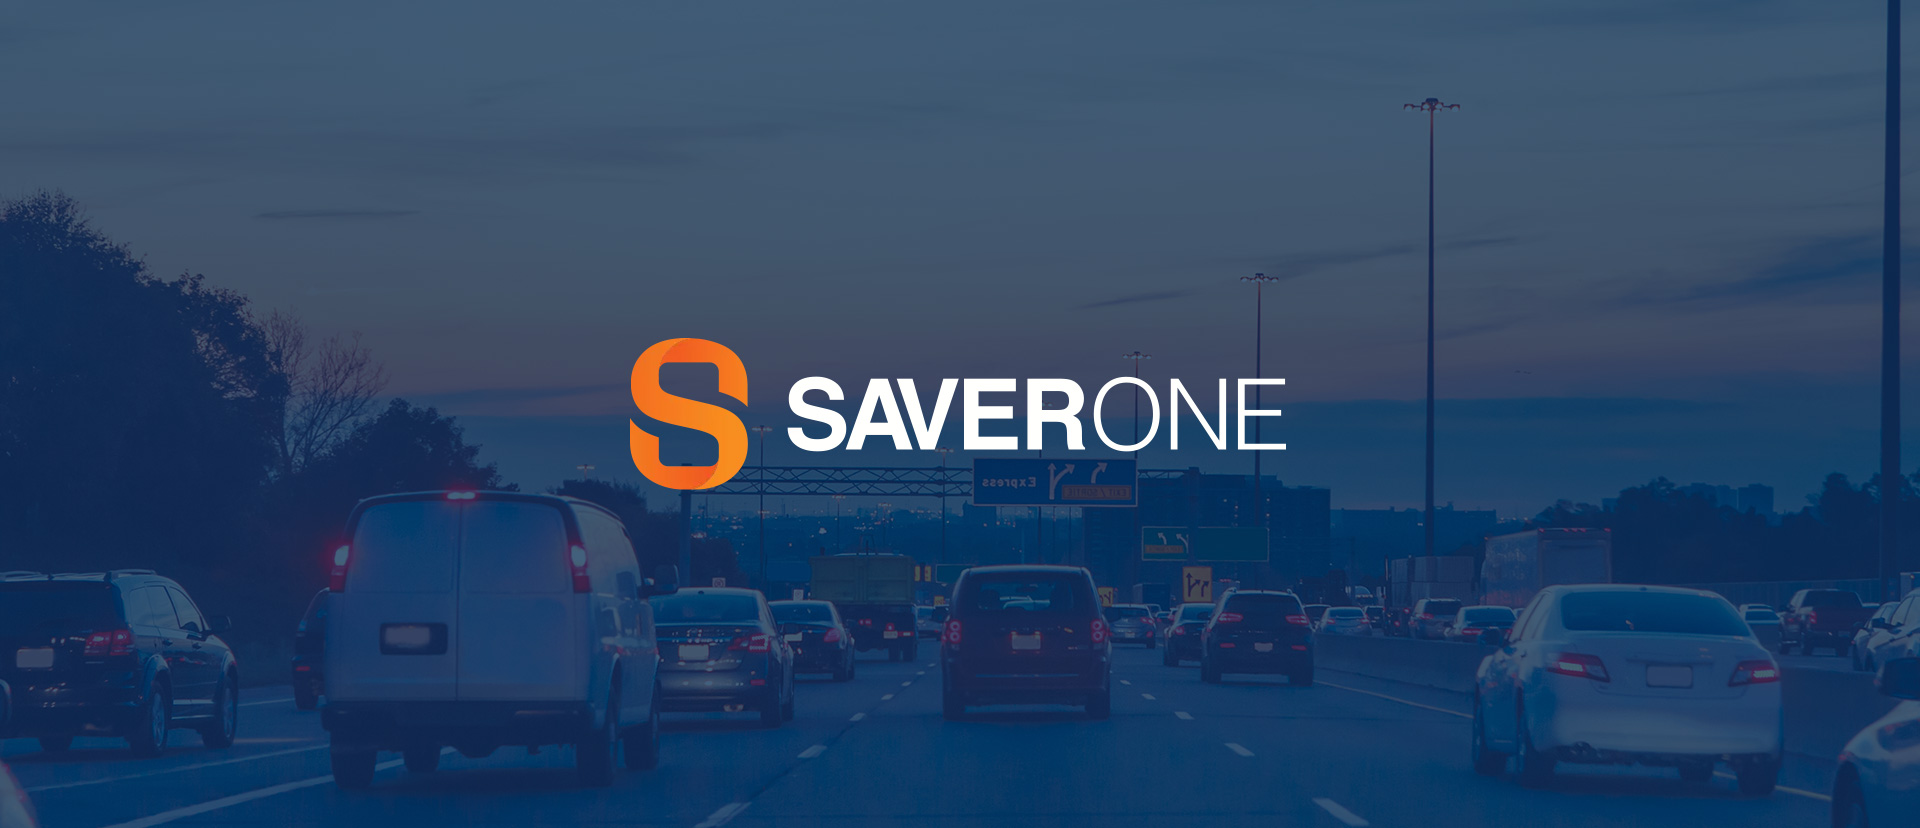 IPO of SaverOne 2014: Road Safety